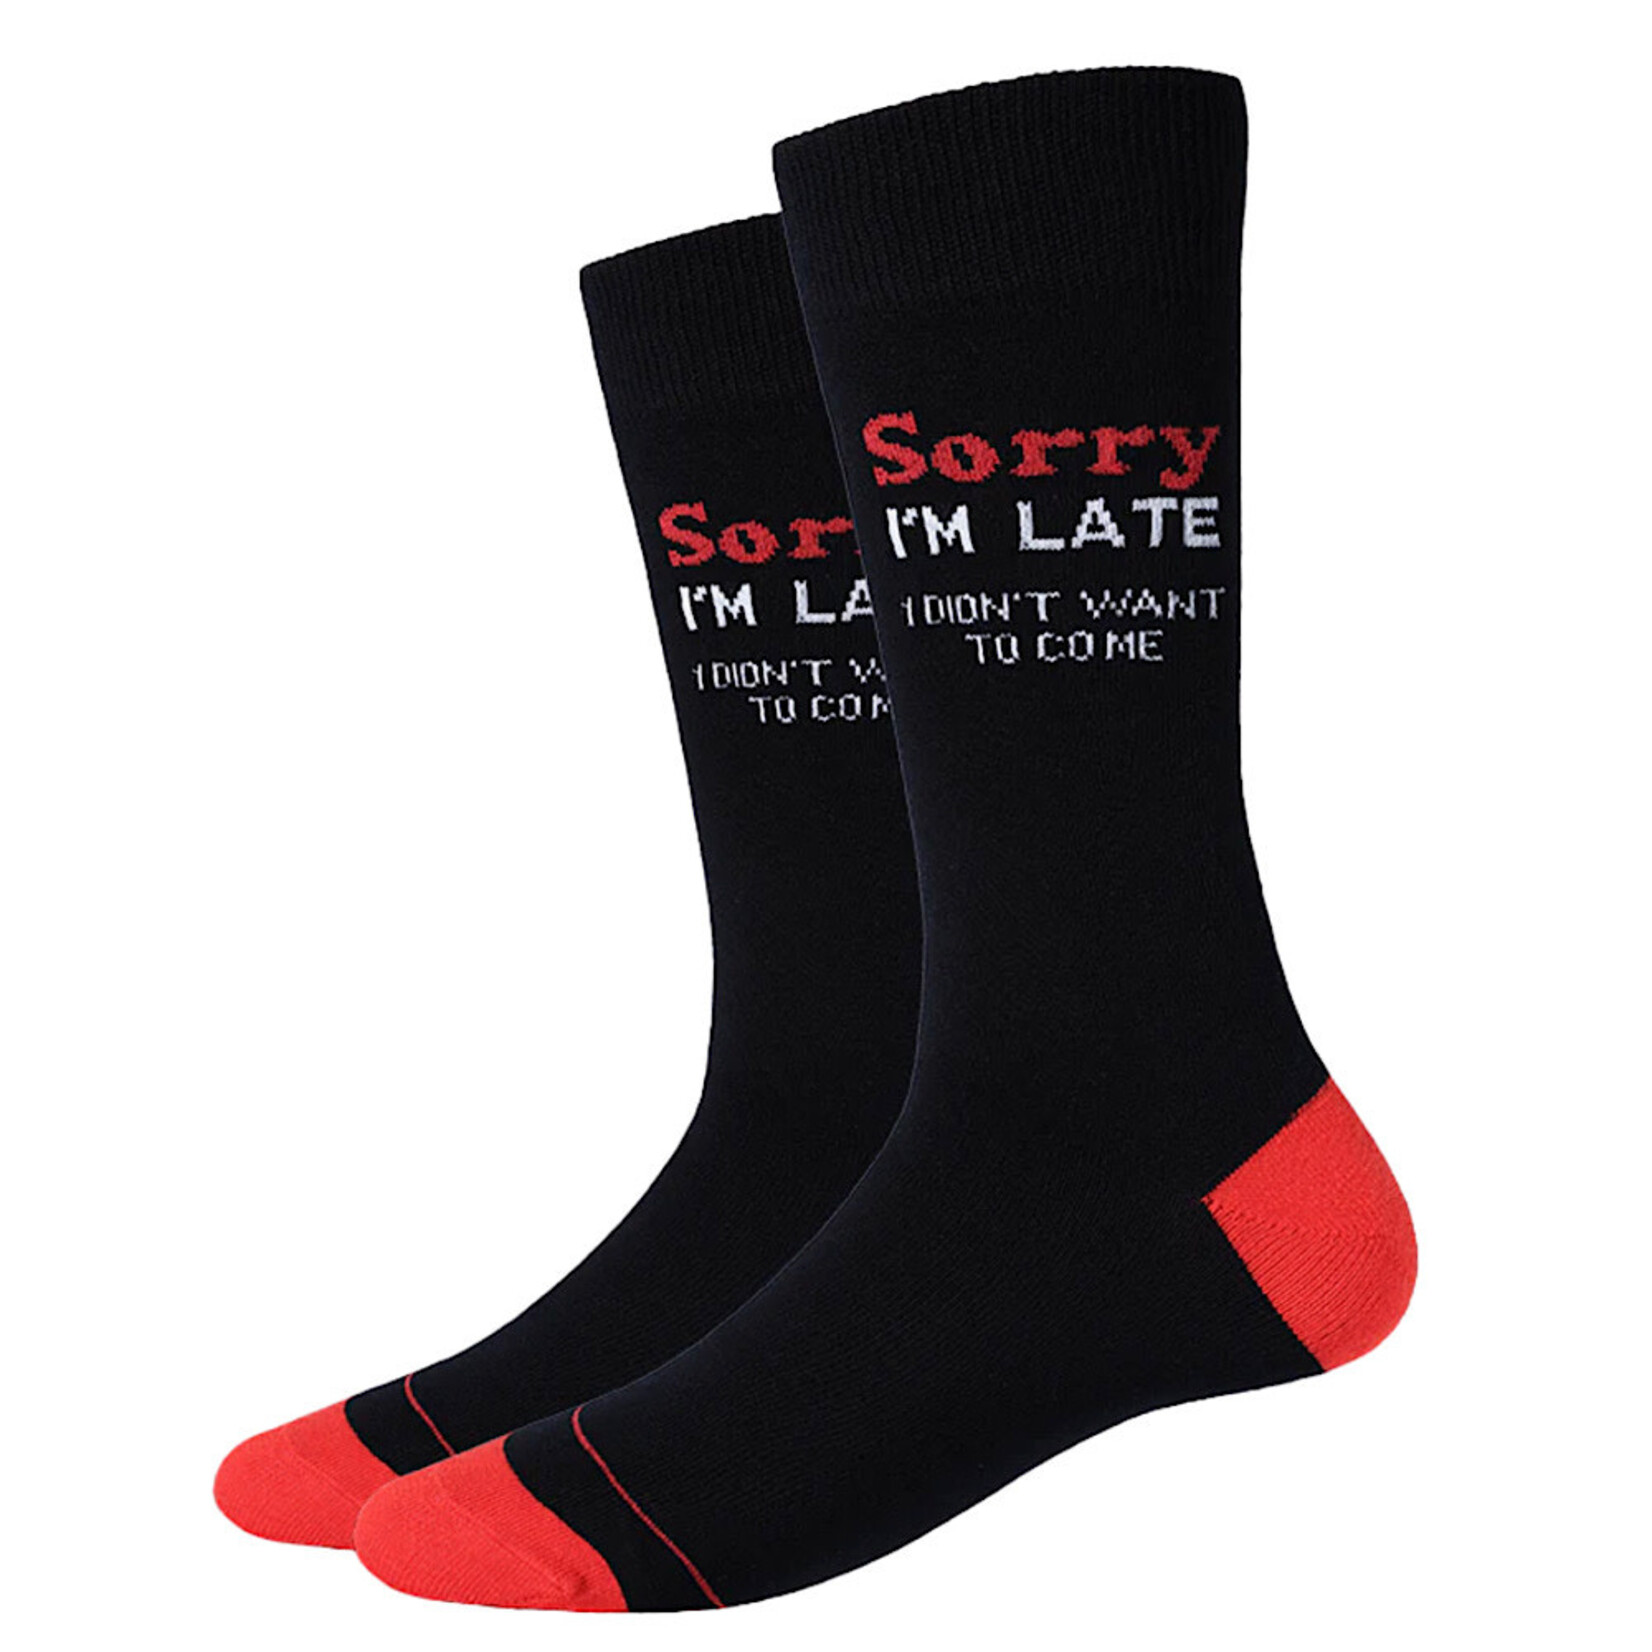 Socks (Men’s) - Sorry I’m Late I Didn’t Want To Come